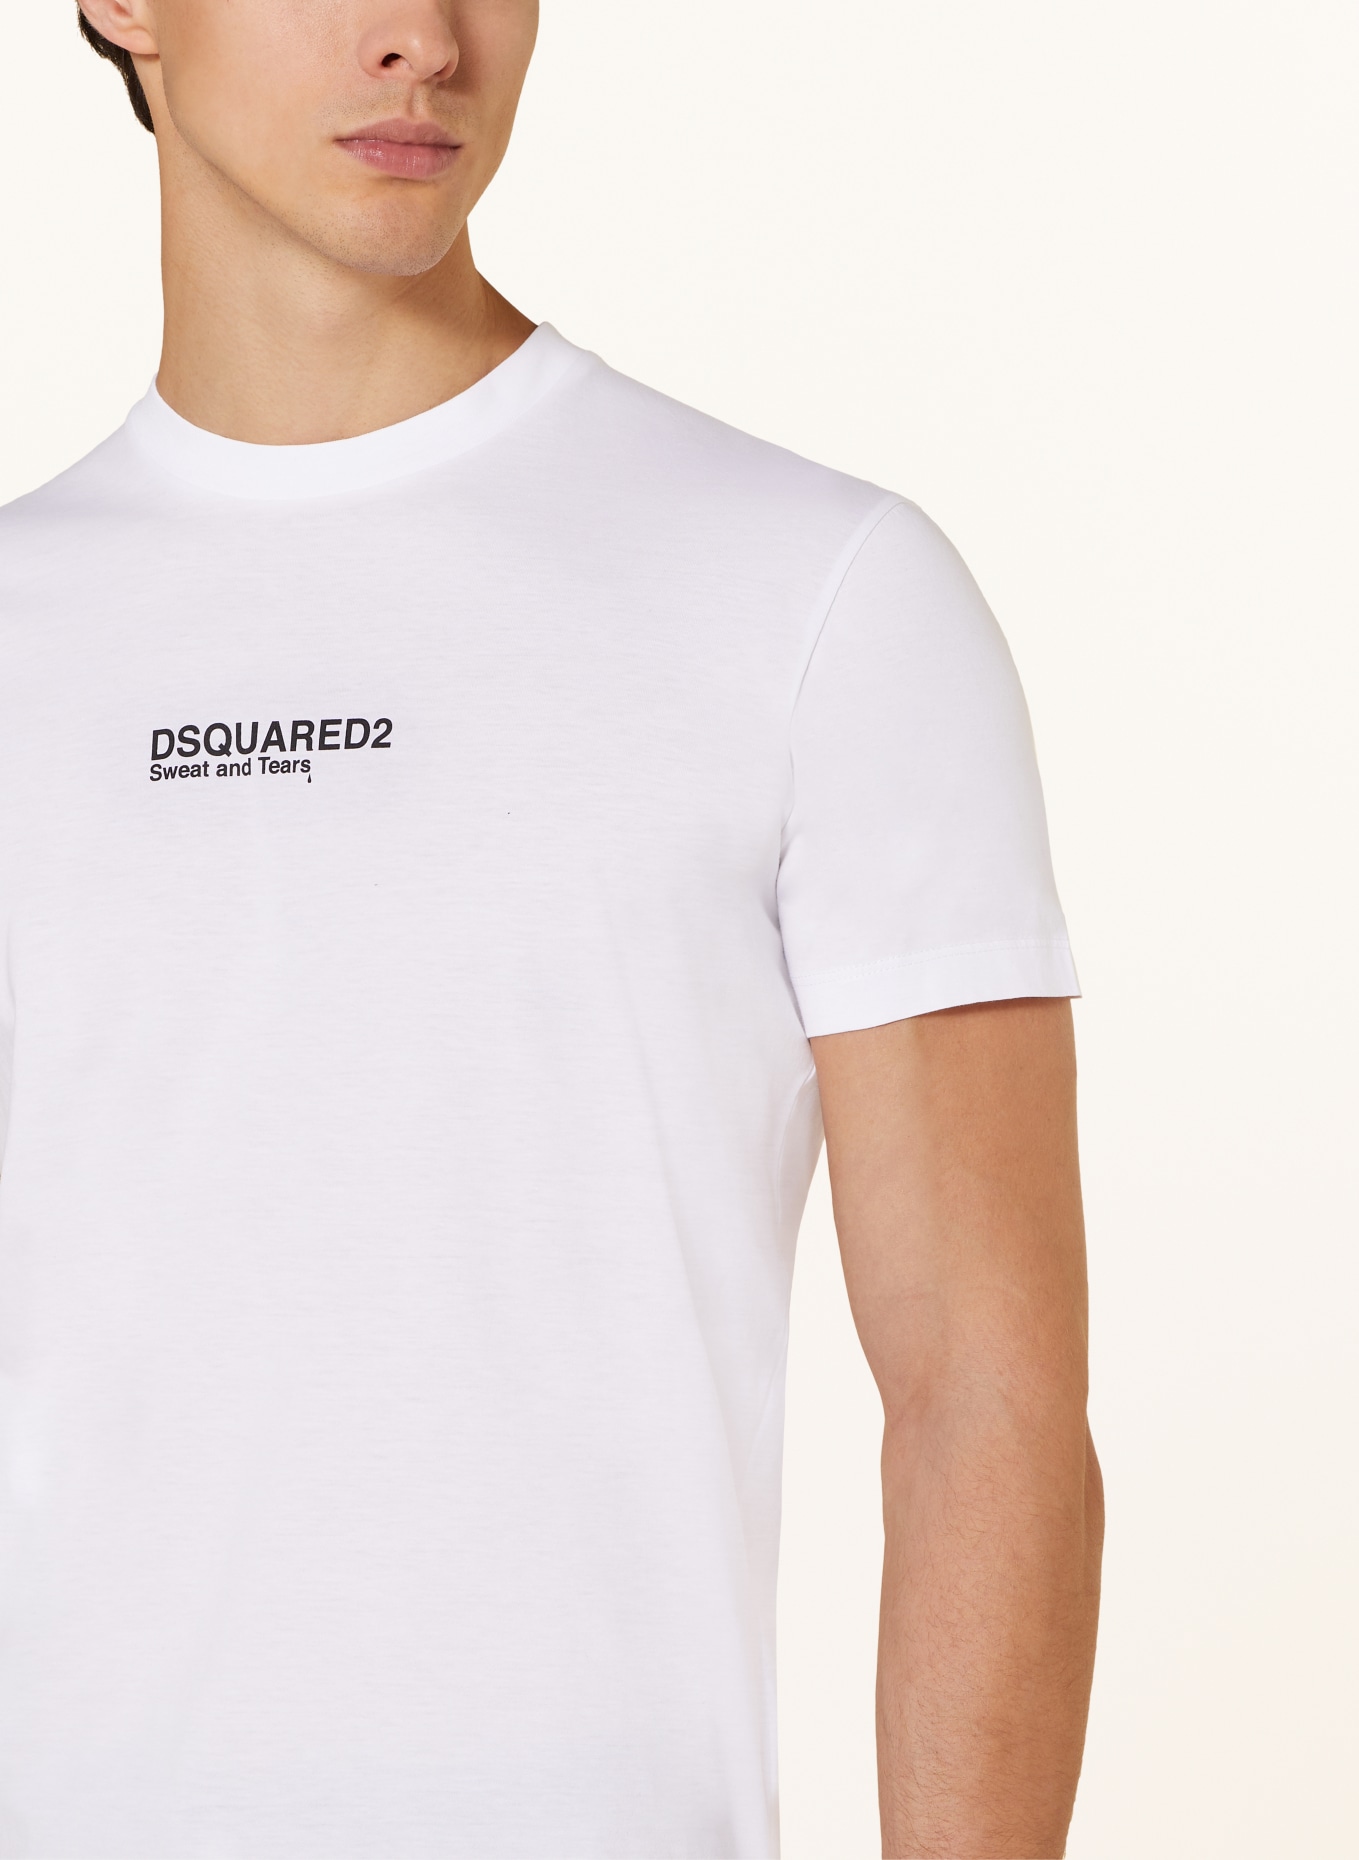 DSQUARED2 T-Shirt SWEAT AND TEARS, Farbe: WEISS (Bild 4)